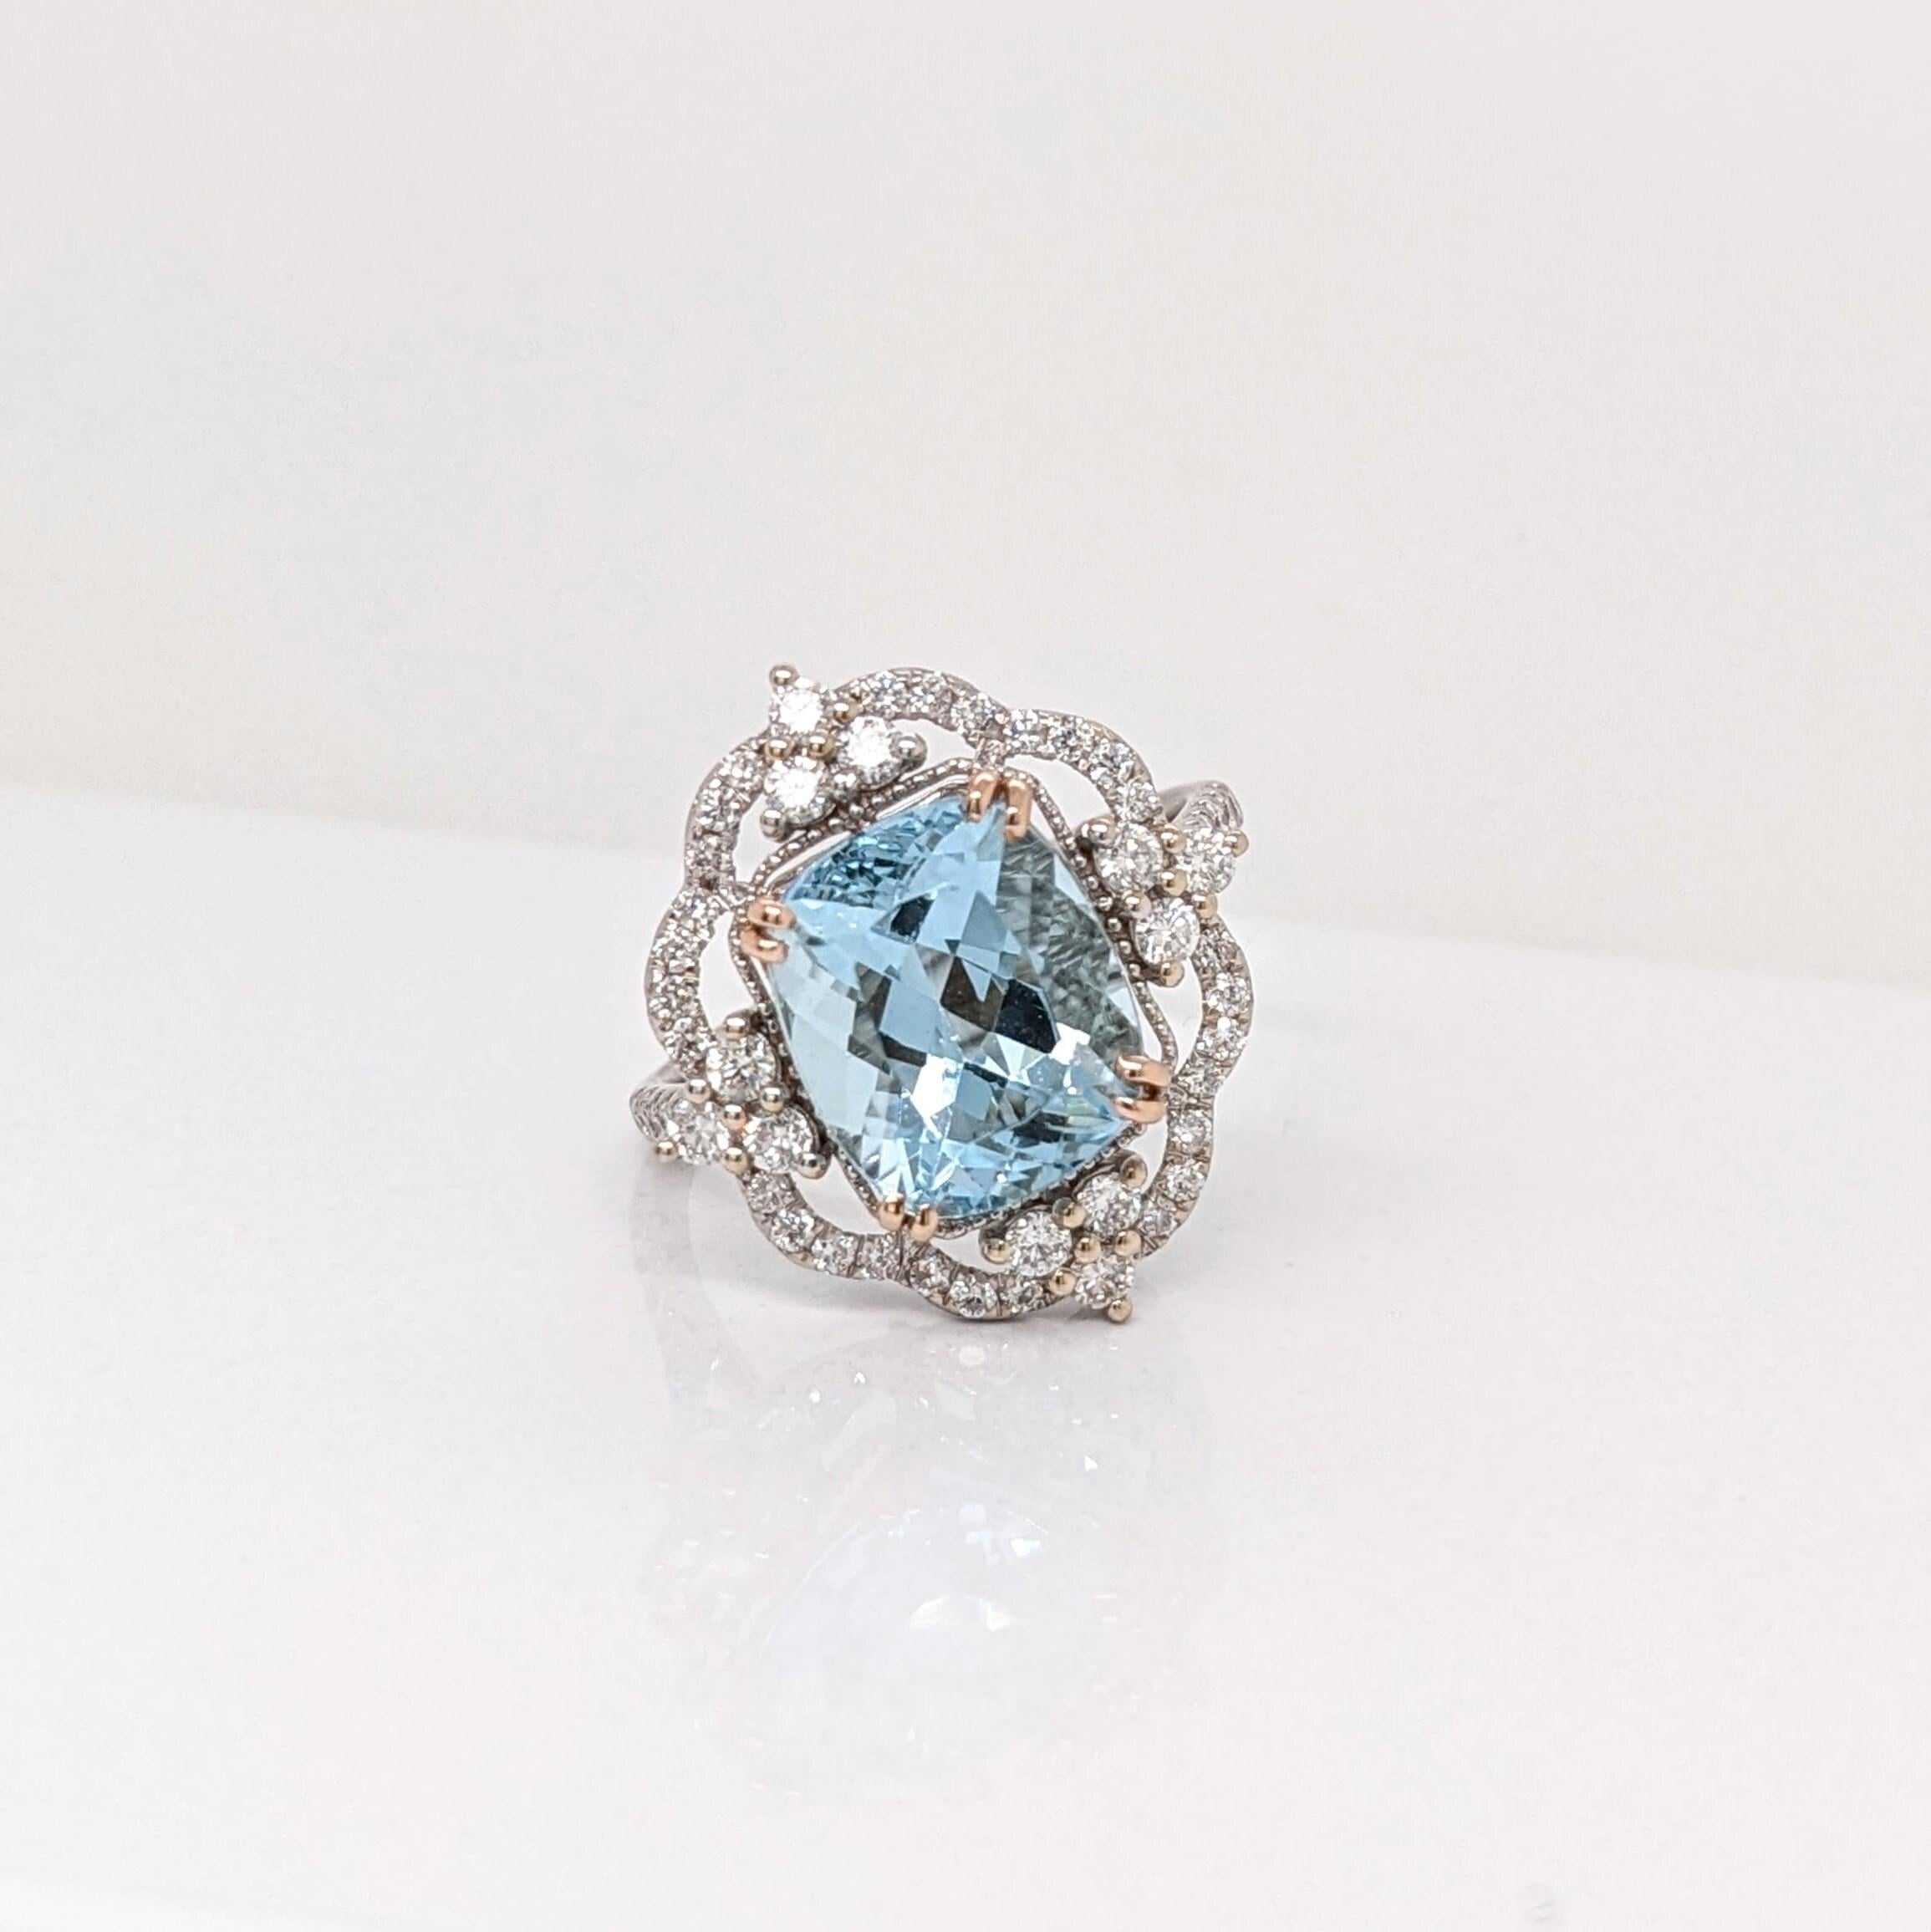 Stunning Aquamarine Ring in Solid 14K Dual Tone Gold with Natural Diamonds 1